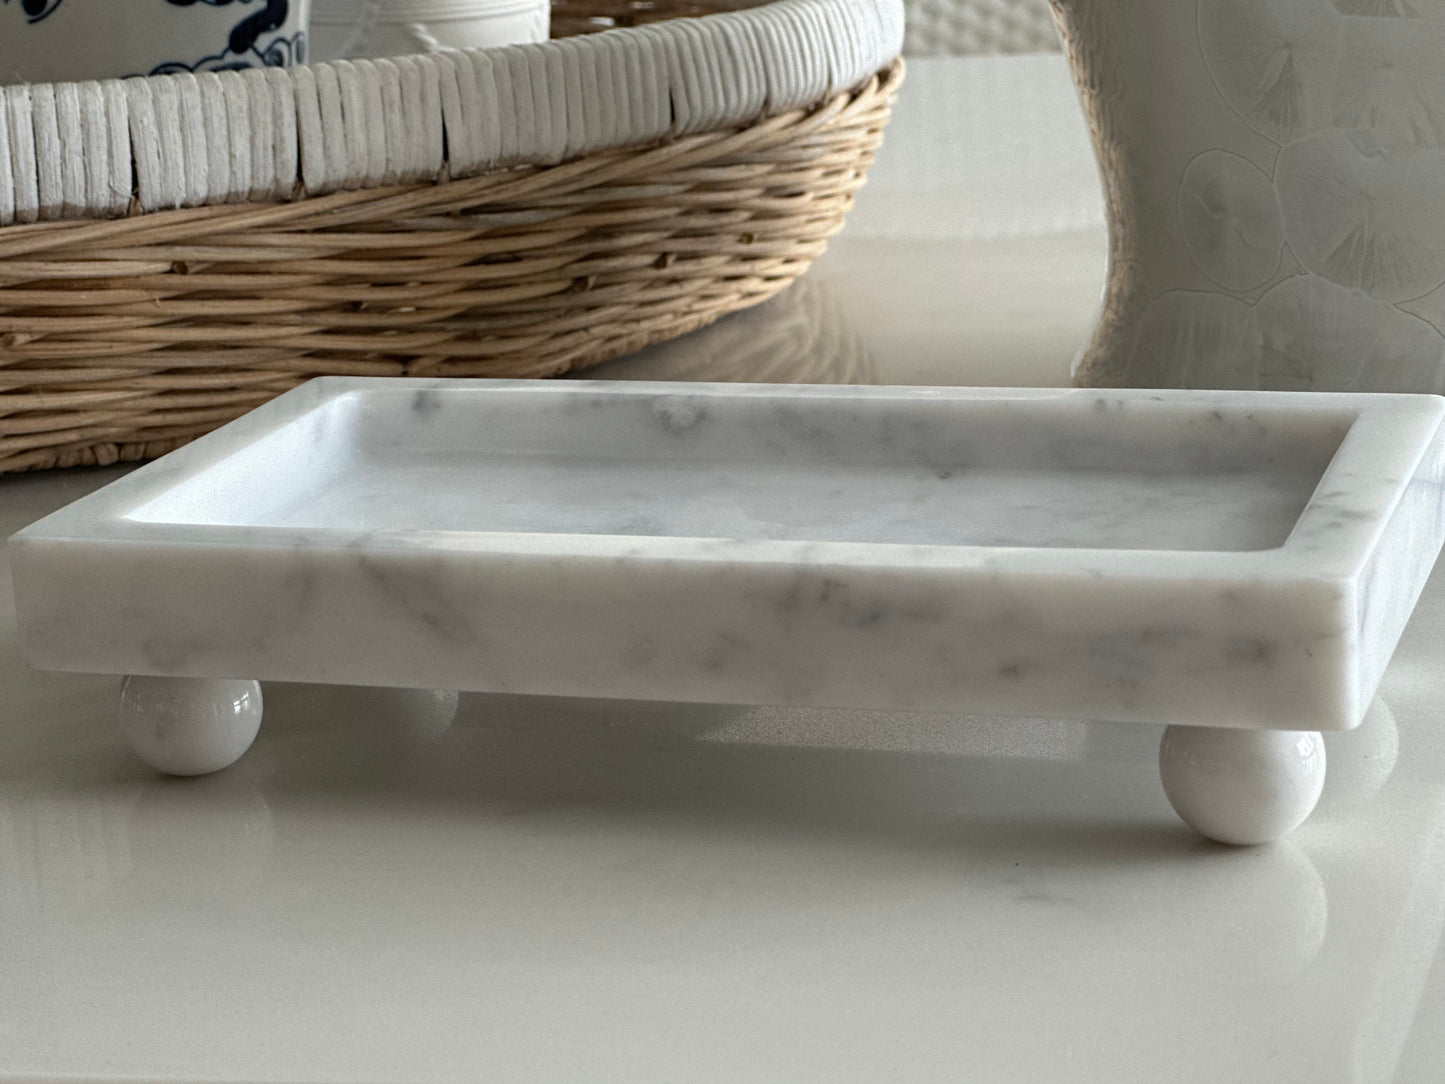 Marble Footed Tray